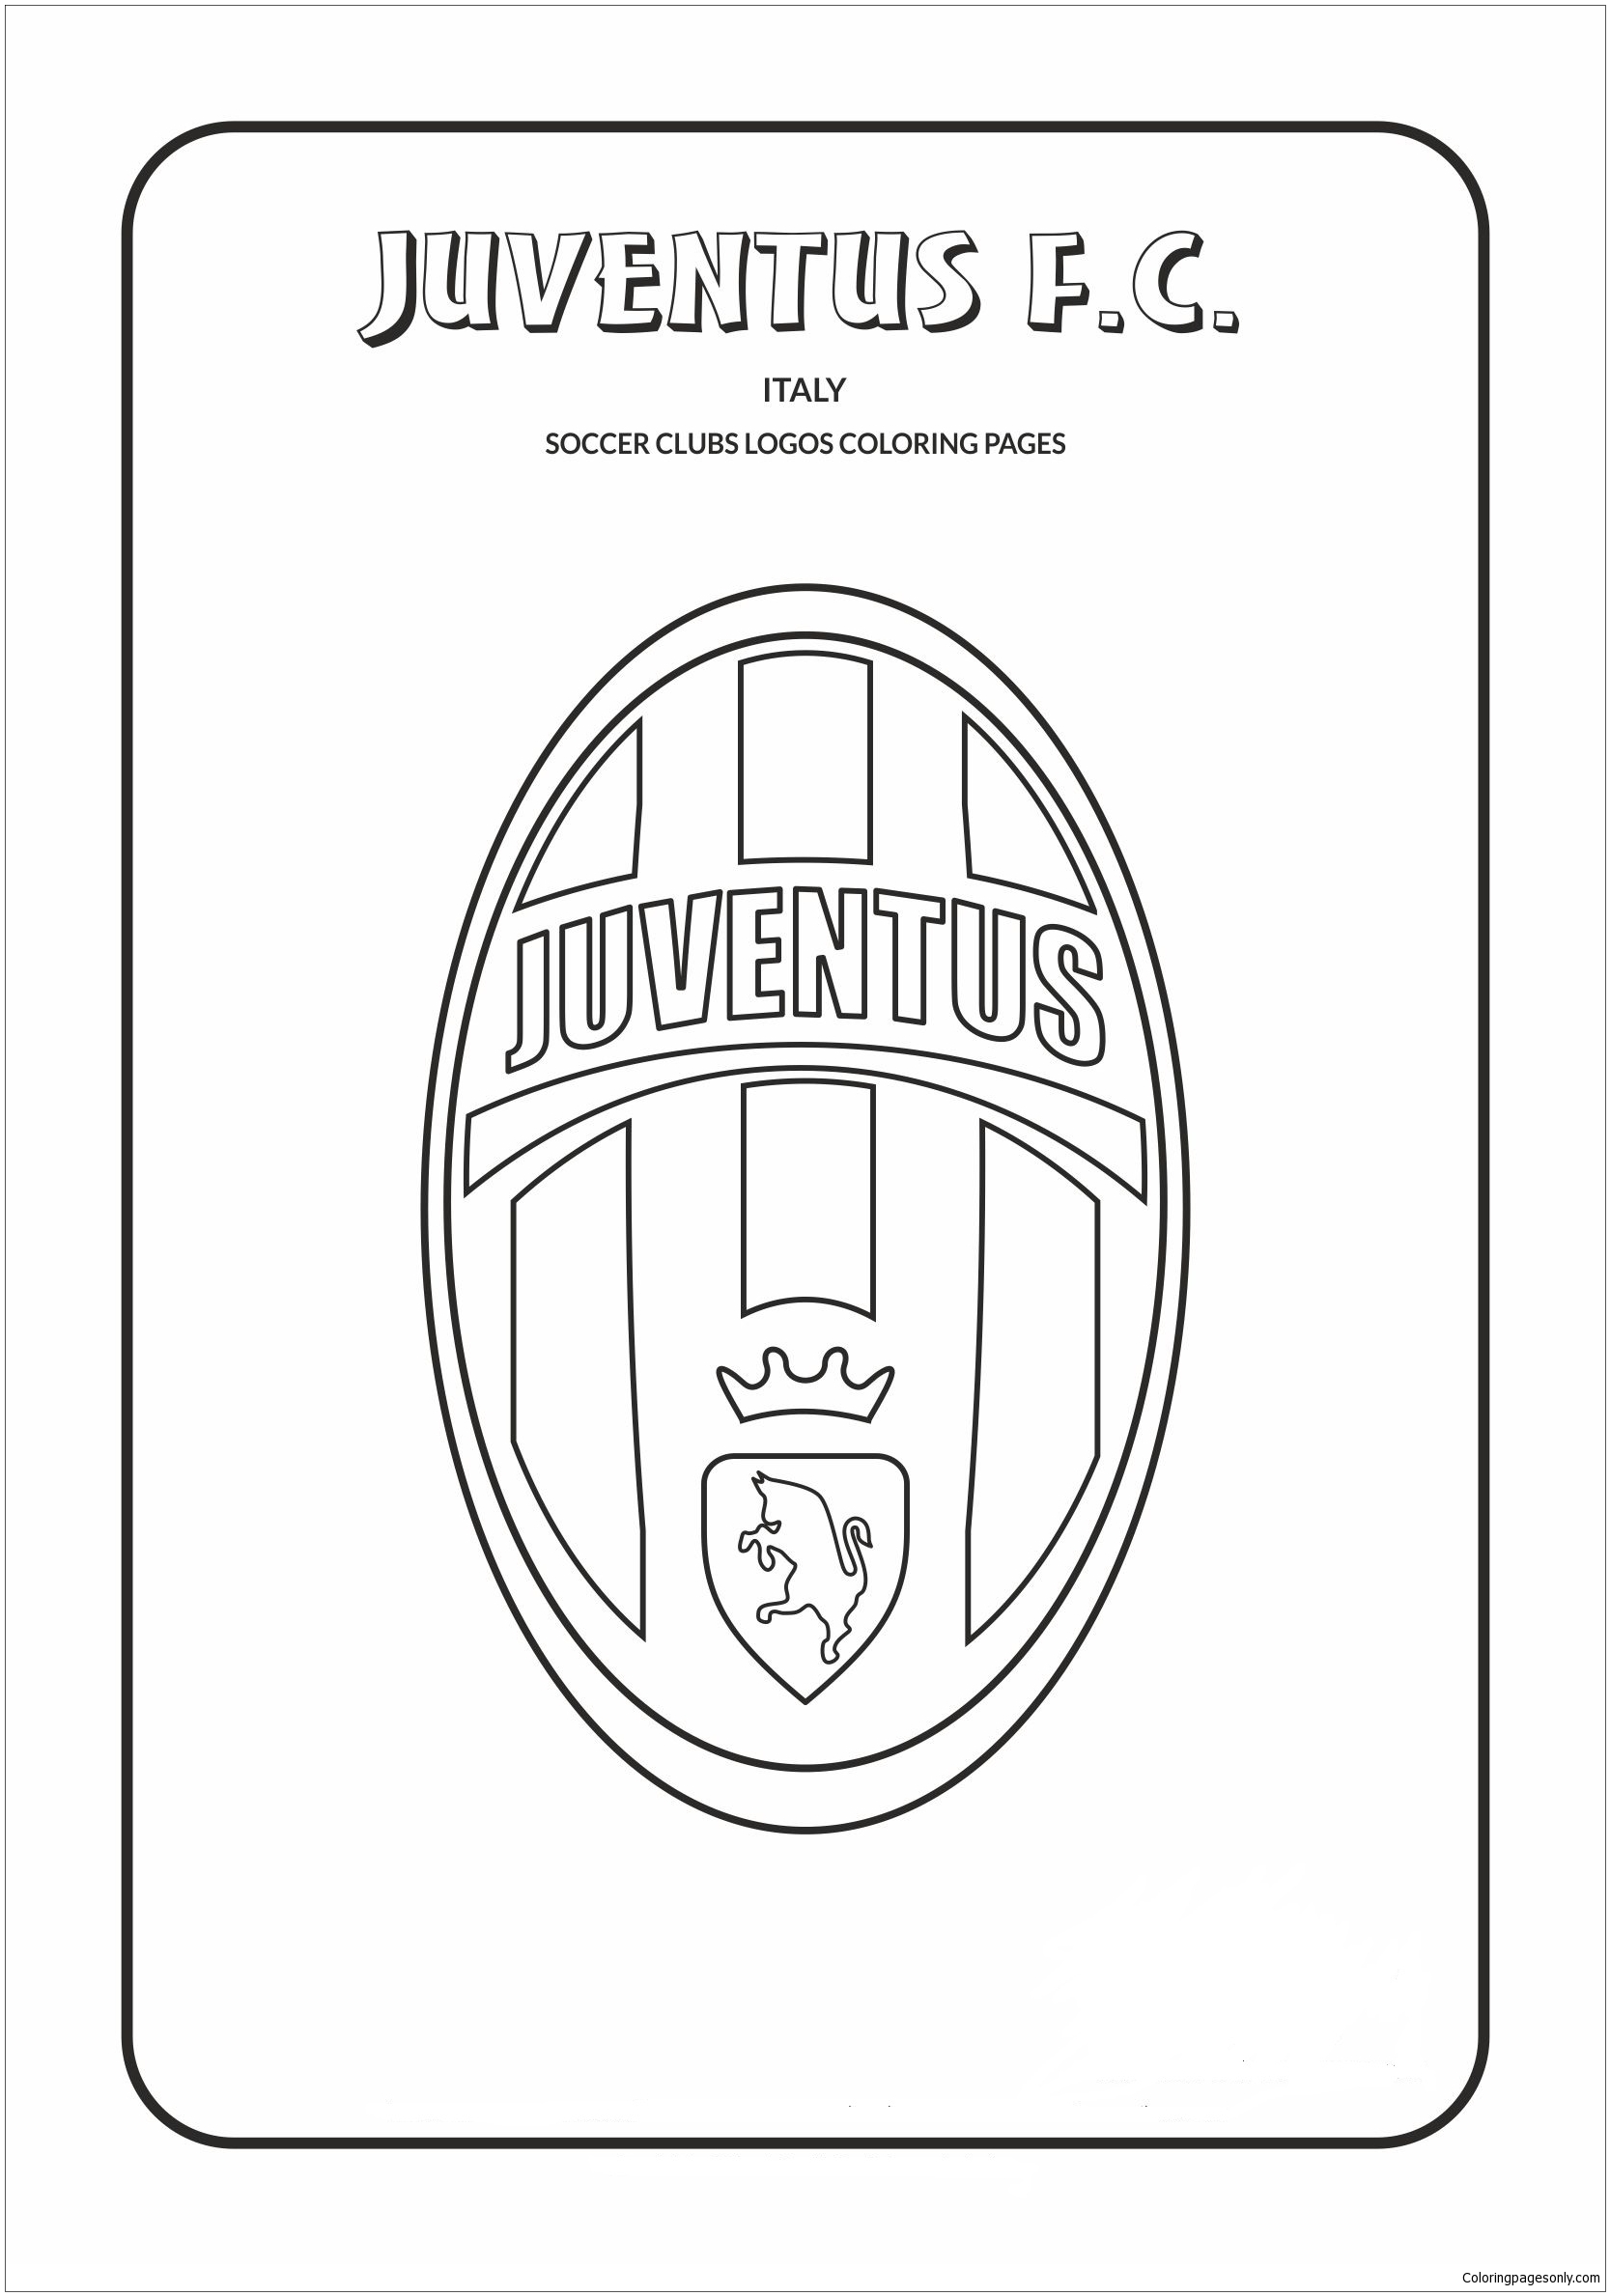  Juventus  F C Coloring  Pages Soccer Clubs Logos Coloring  